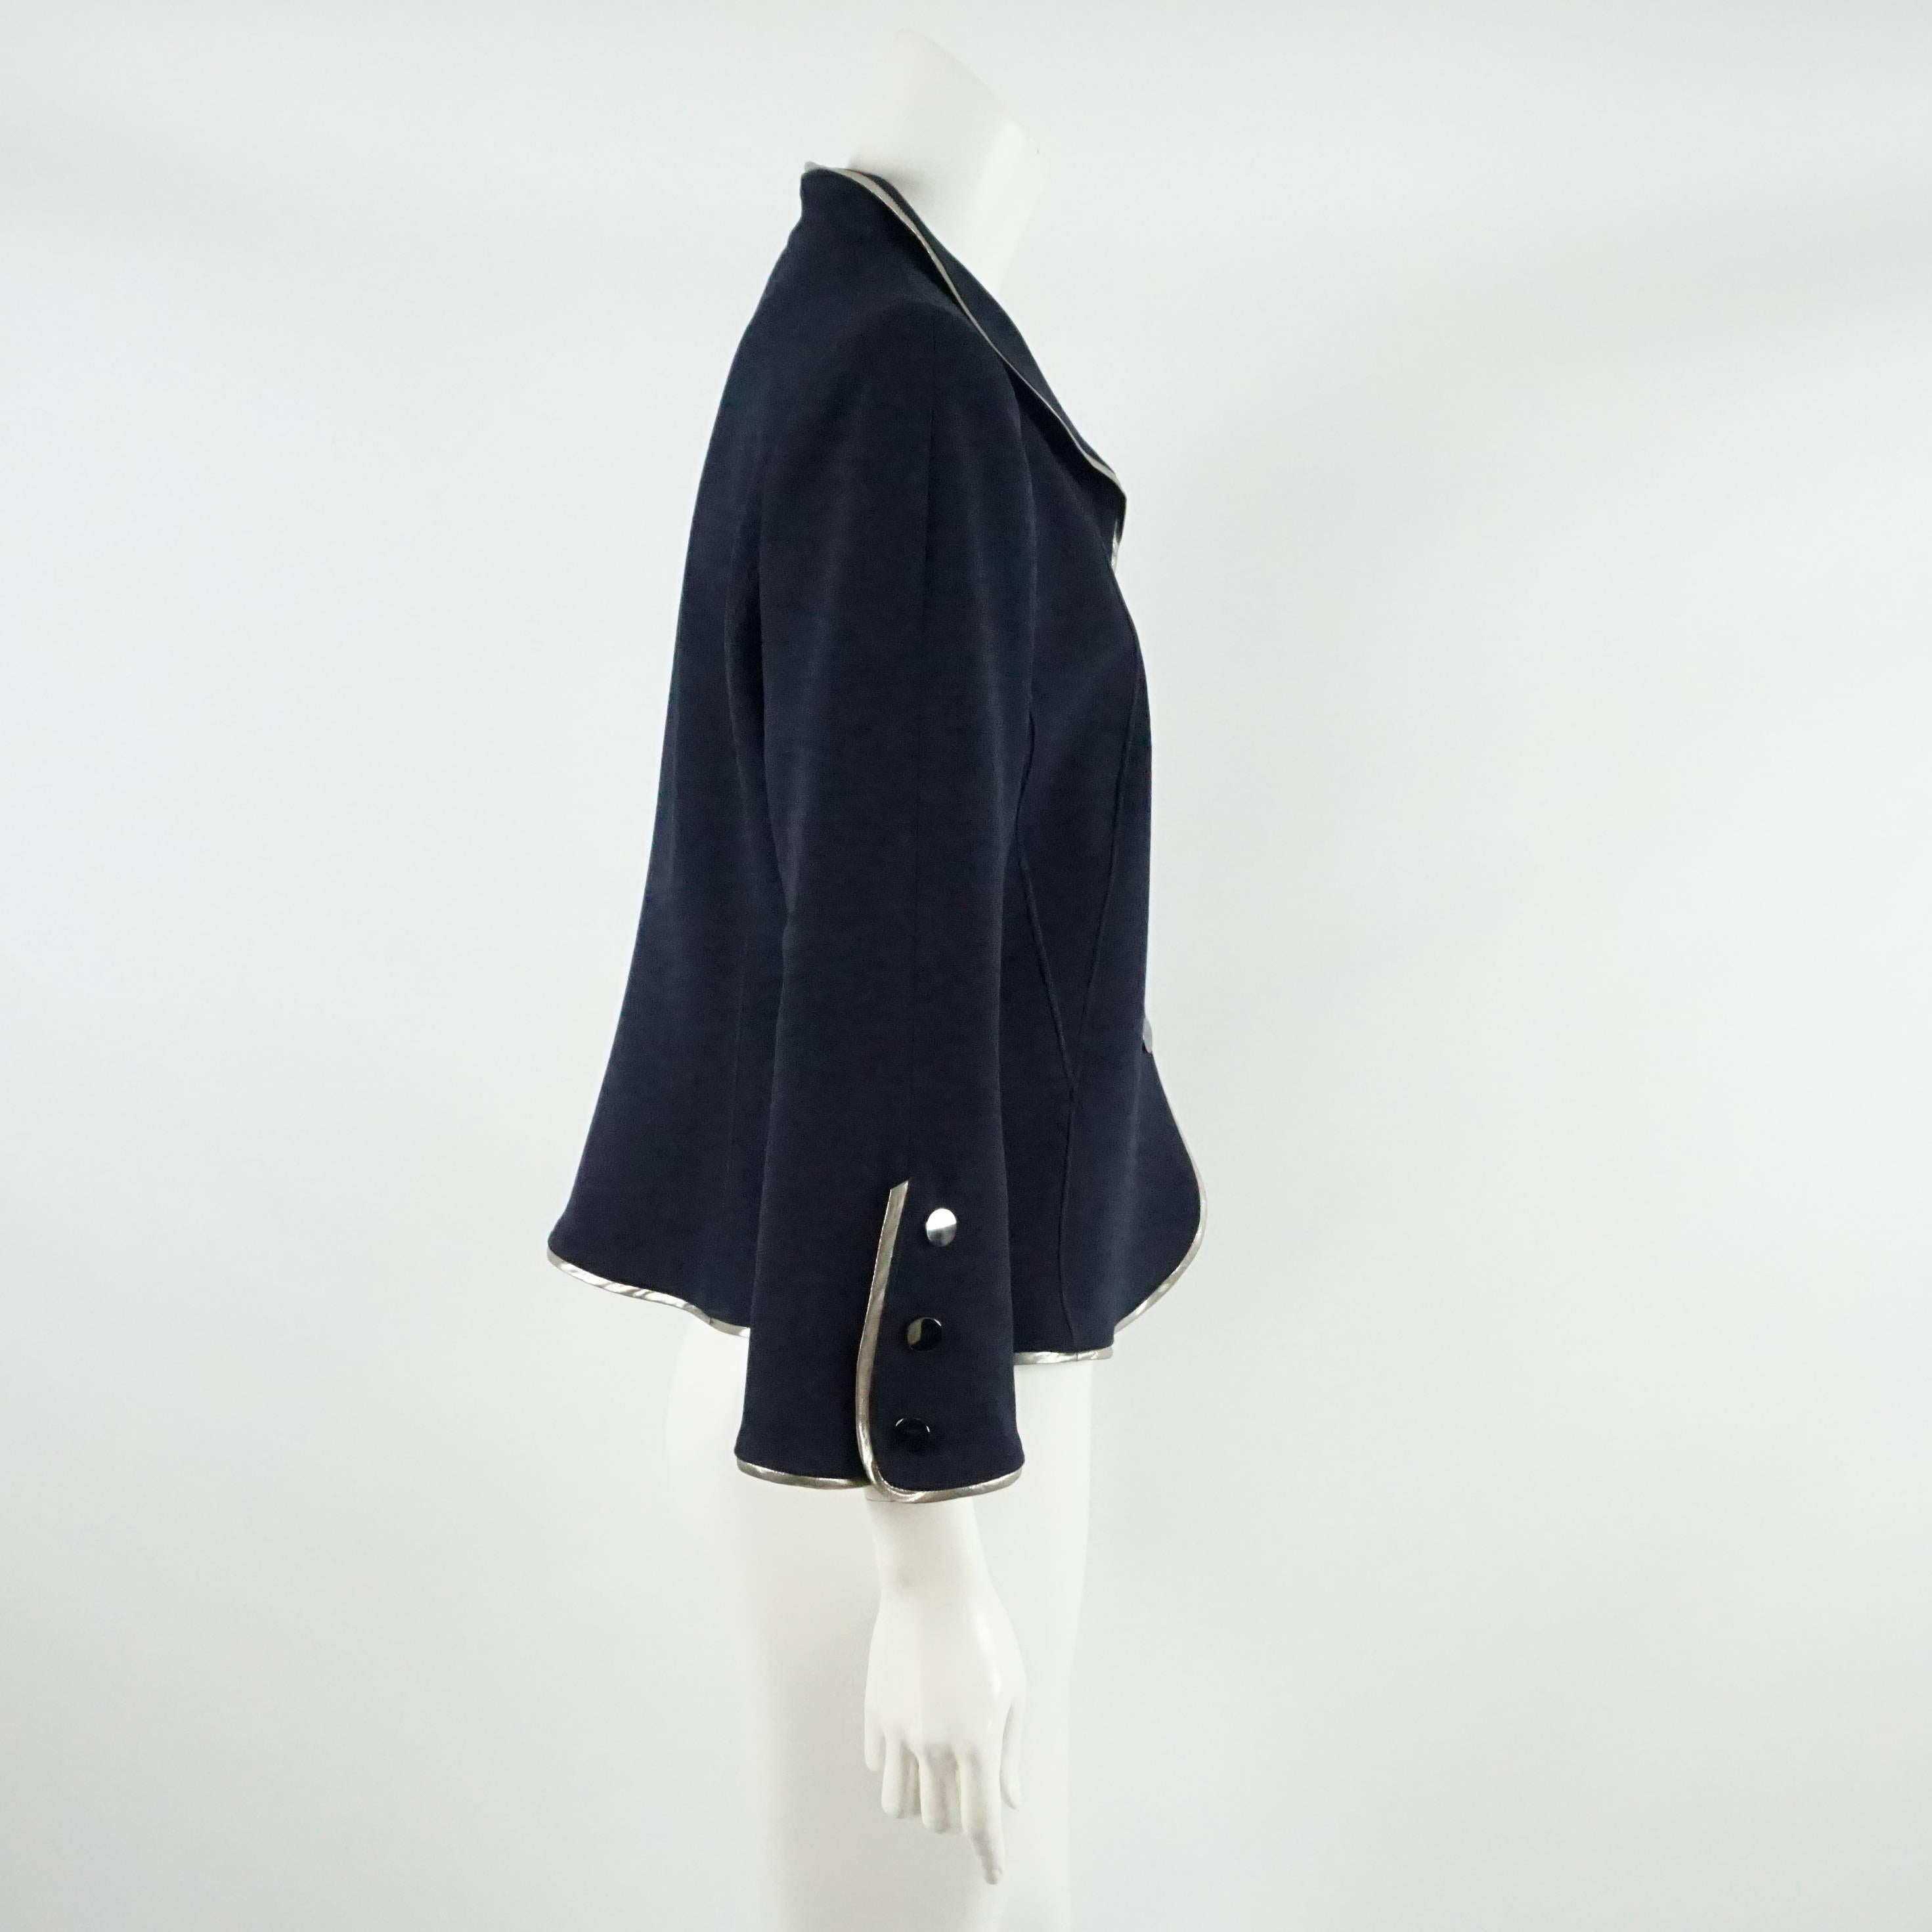 This beautiful Oscar de la Renta jacket is made of navy wool. It has a silver trim and three snap buttons going down the front. This jacket is in excellent condition.

Measurements
Shoulder to Shoulder: 16.5